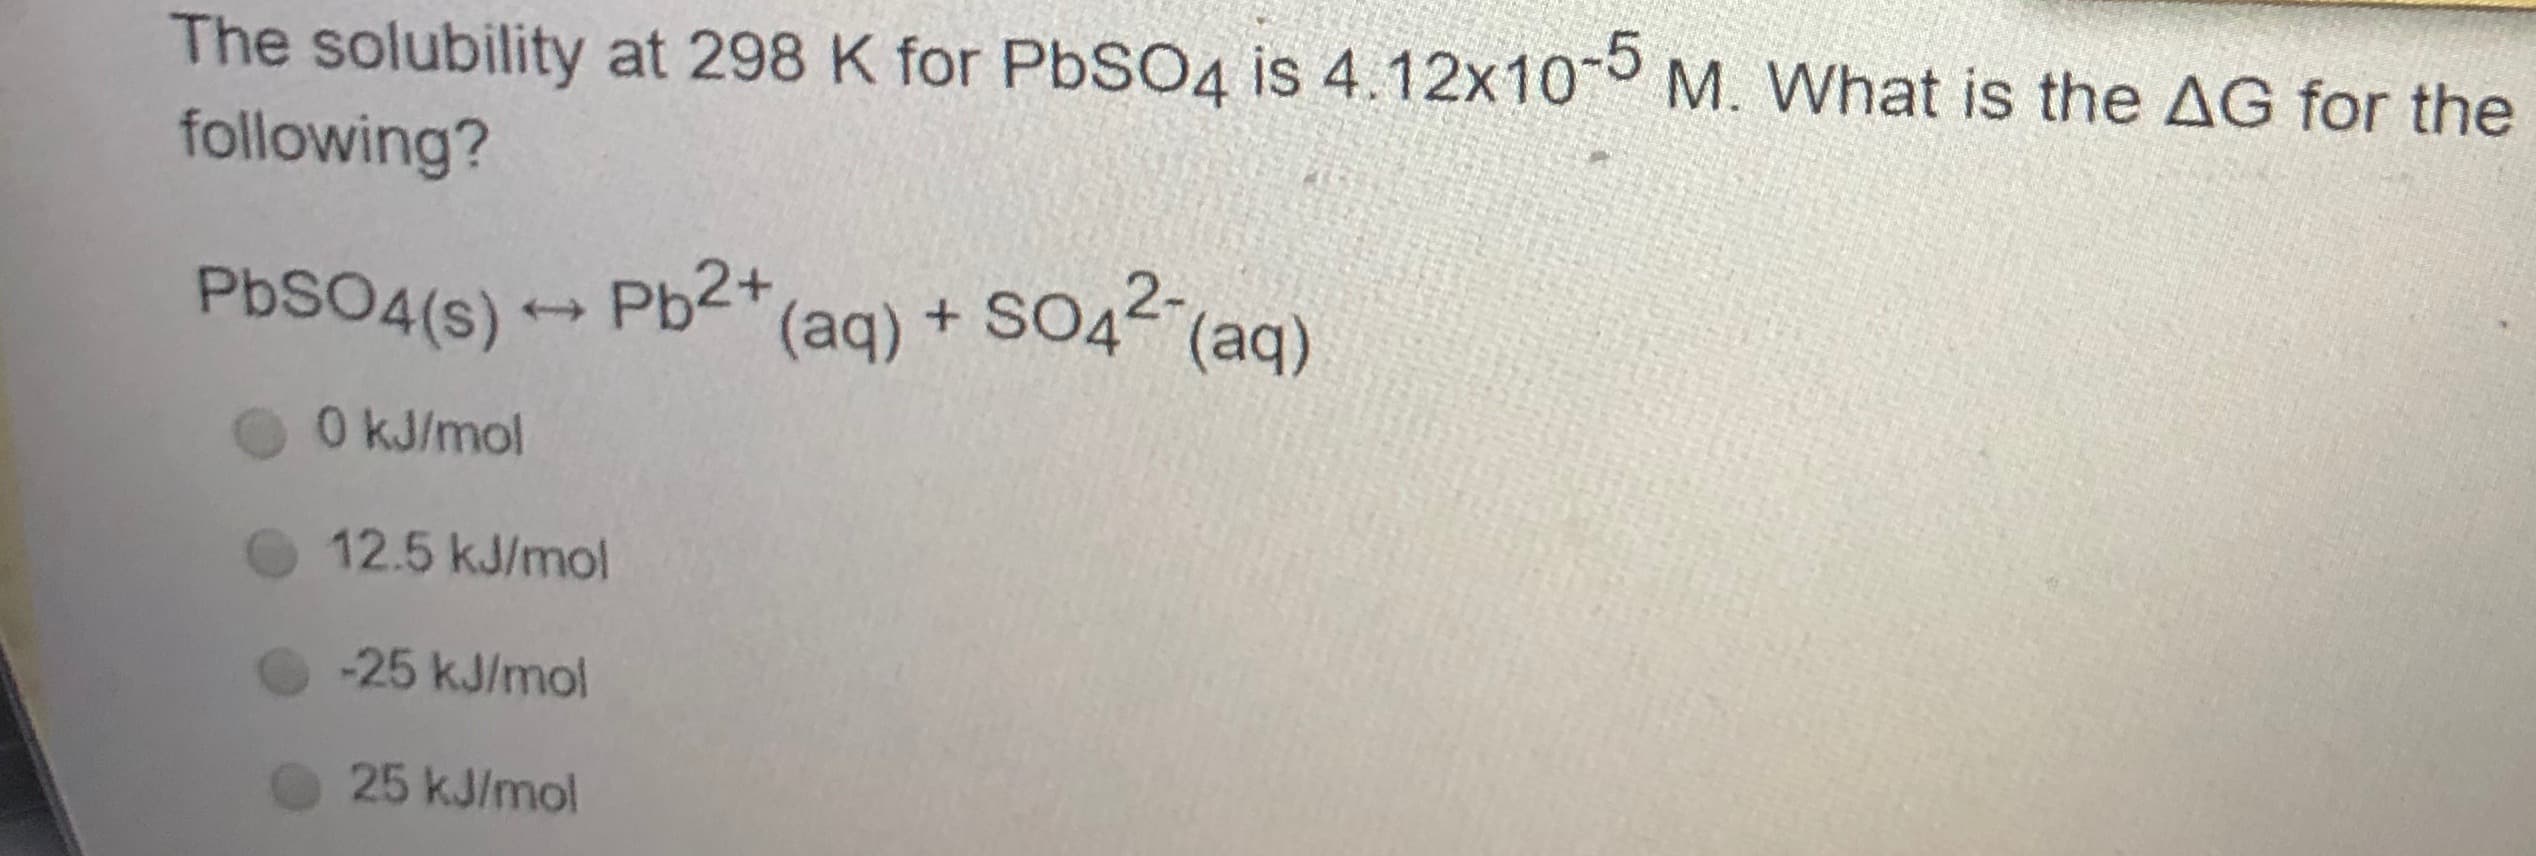 The solubility at 298 K for PbSO4 is 4.12x10-5 M. What is the AG for the
following?
